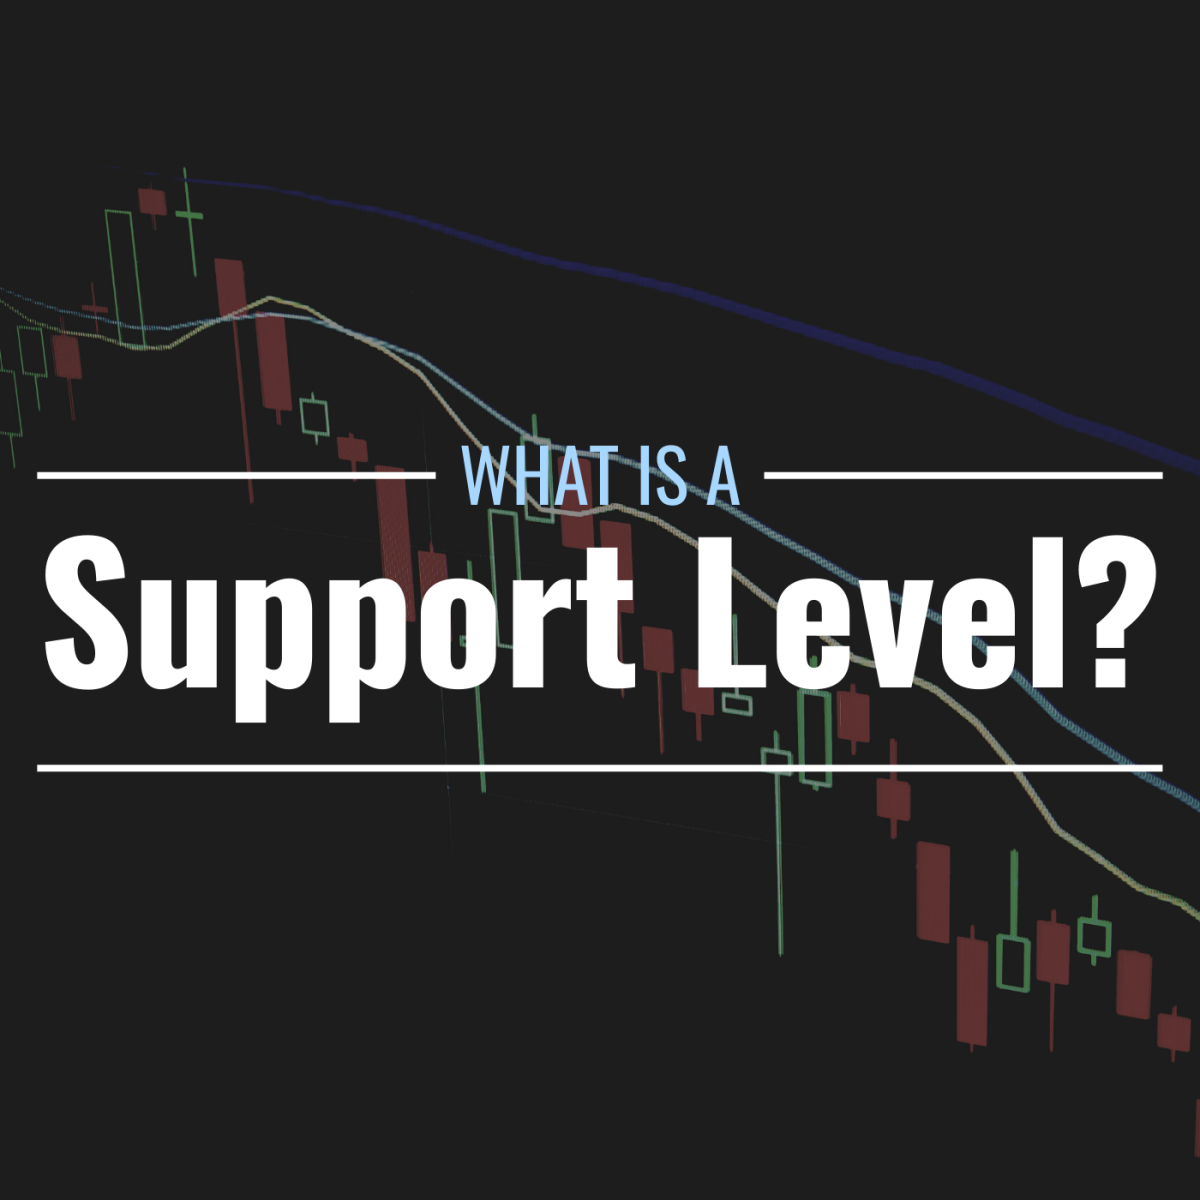 Darkened image of a candlestick price chart for a security with text overlay that reads "What Is a Support Level?"